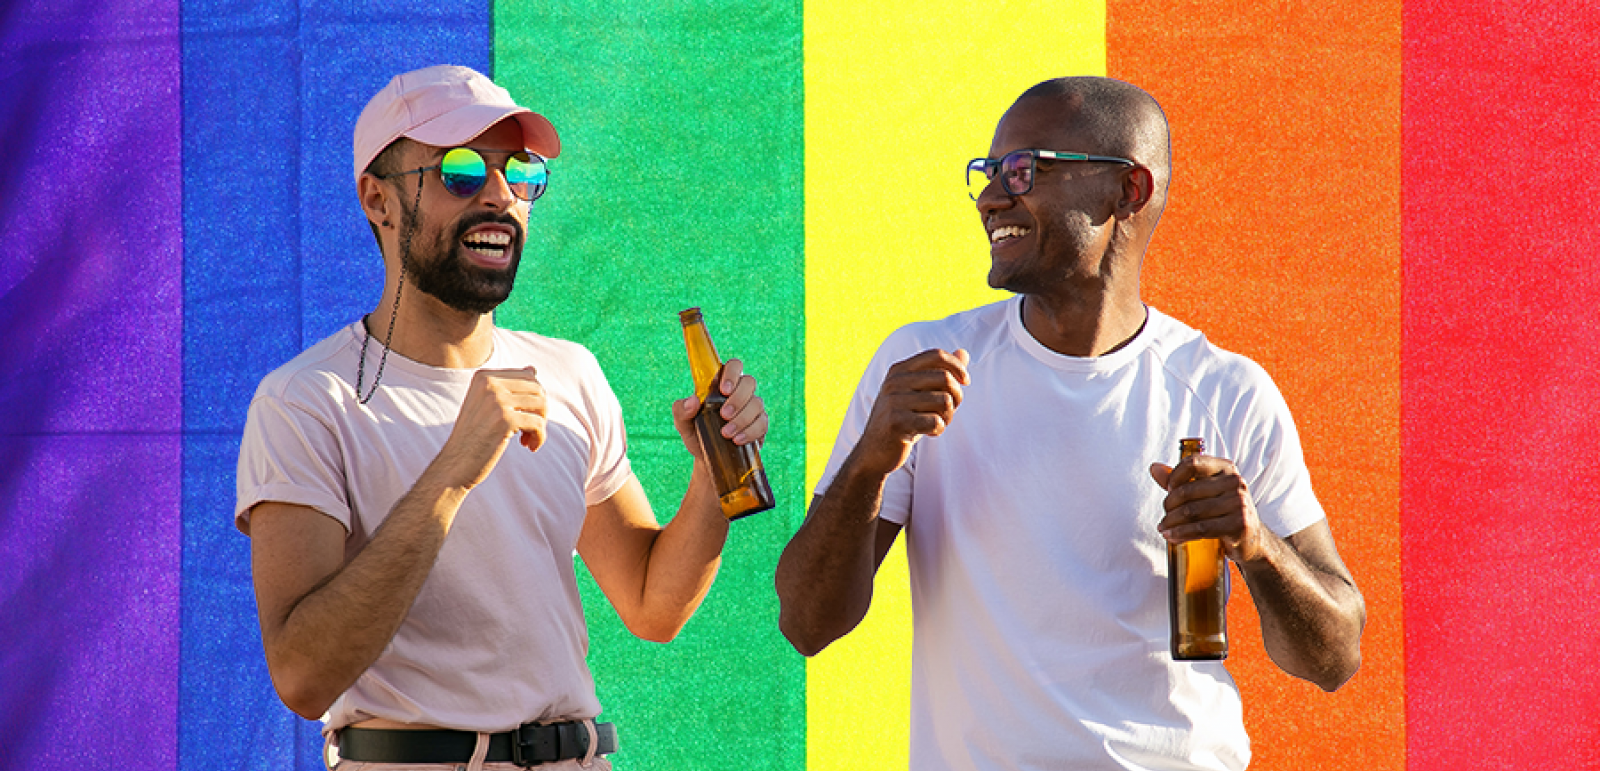 Photo for: Honoring The LGBTQ+ Community In Cannabis Drinks Industry 